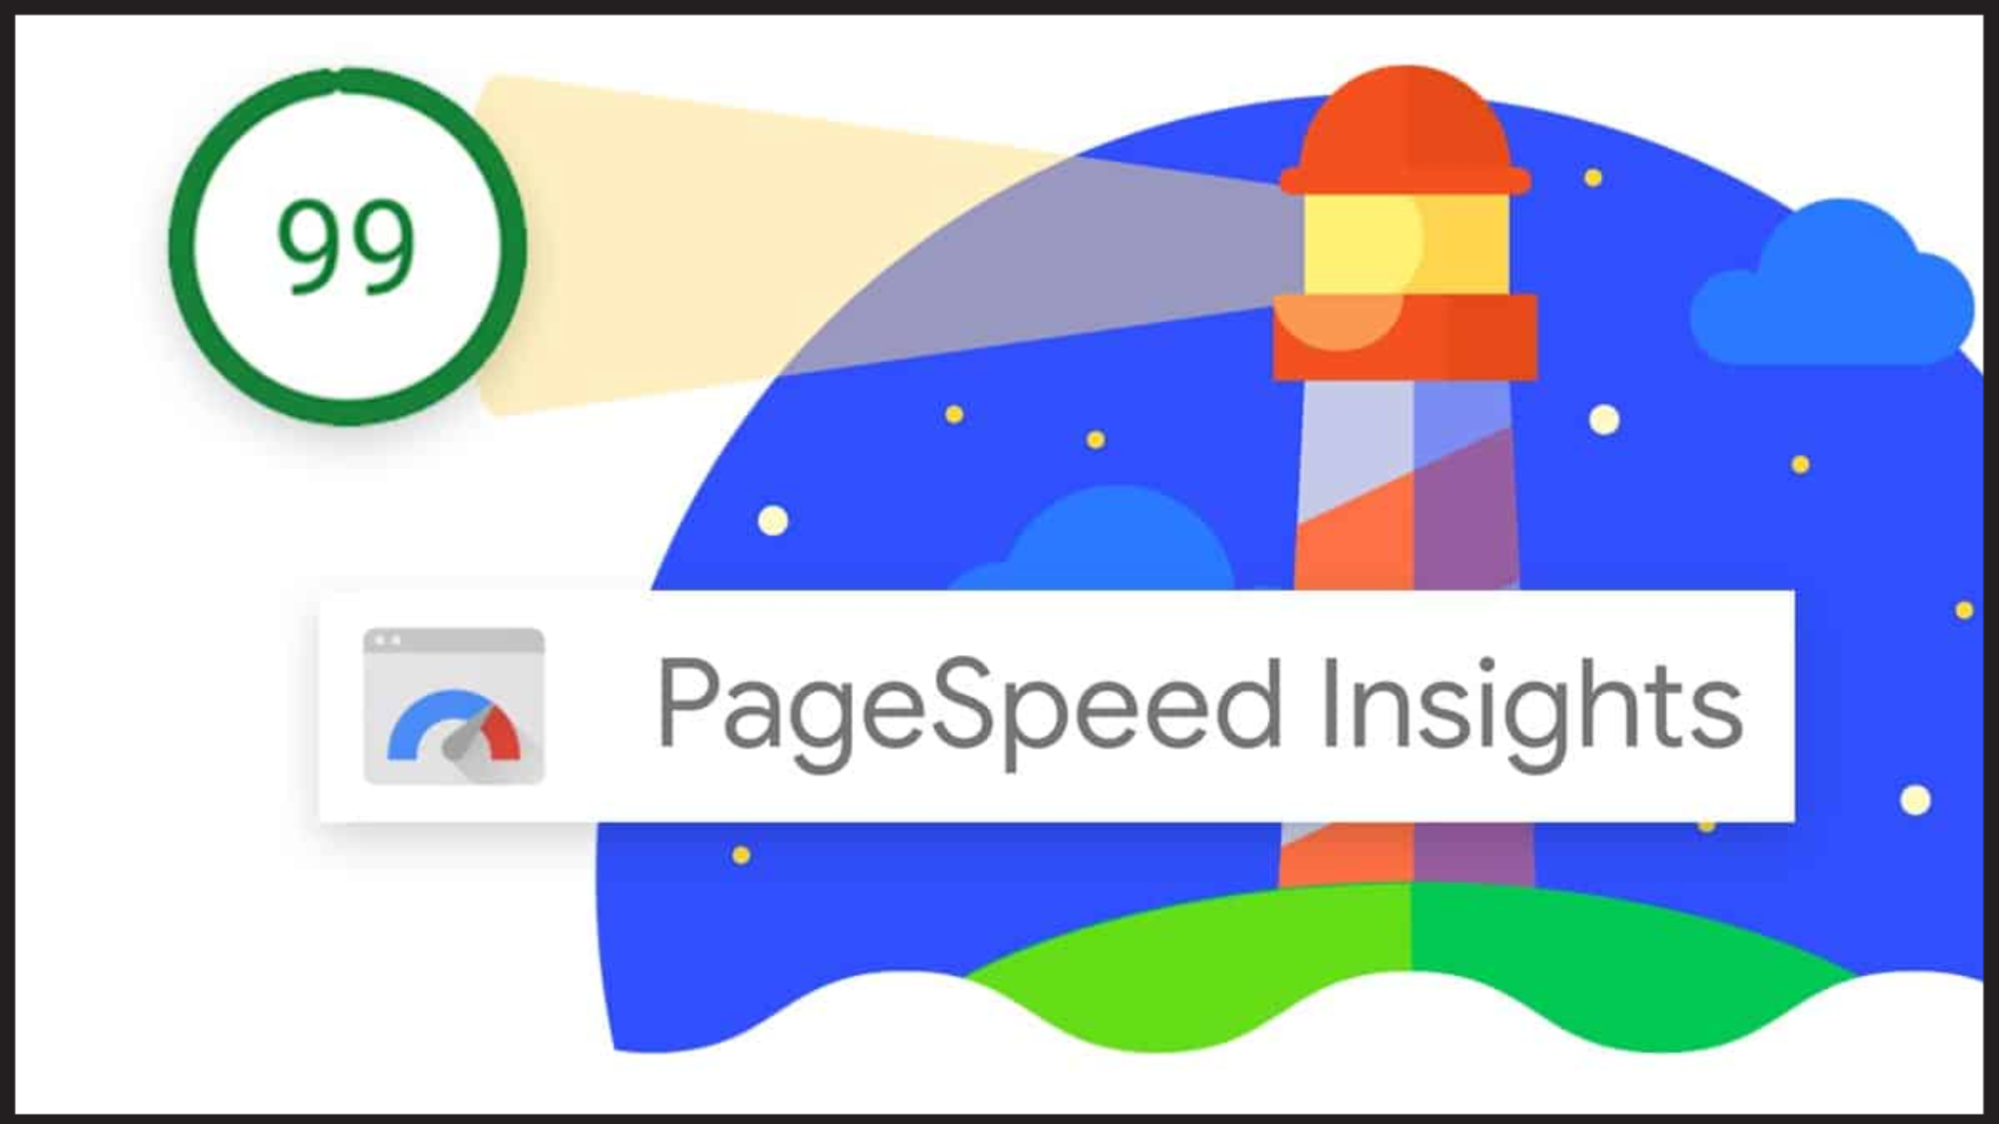 How Does Pagespeed Insights Measure Performance?